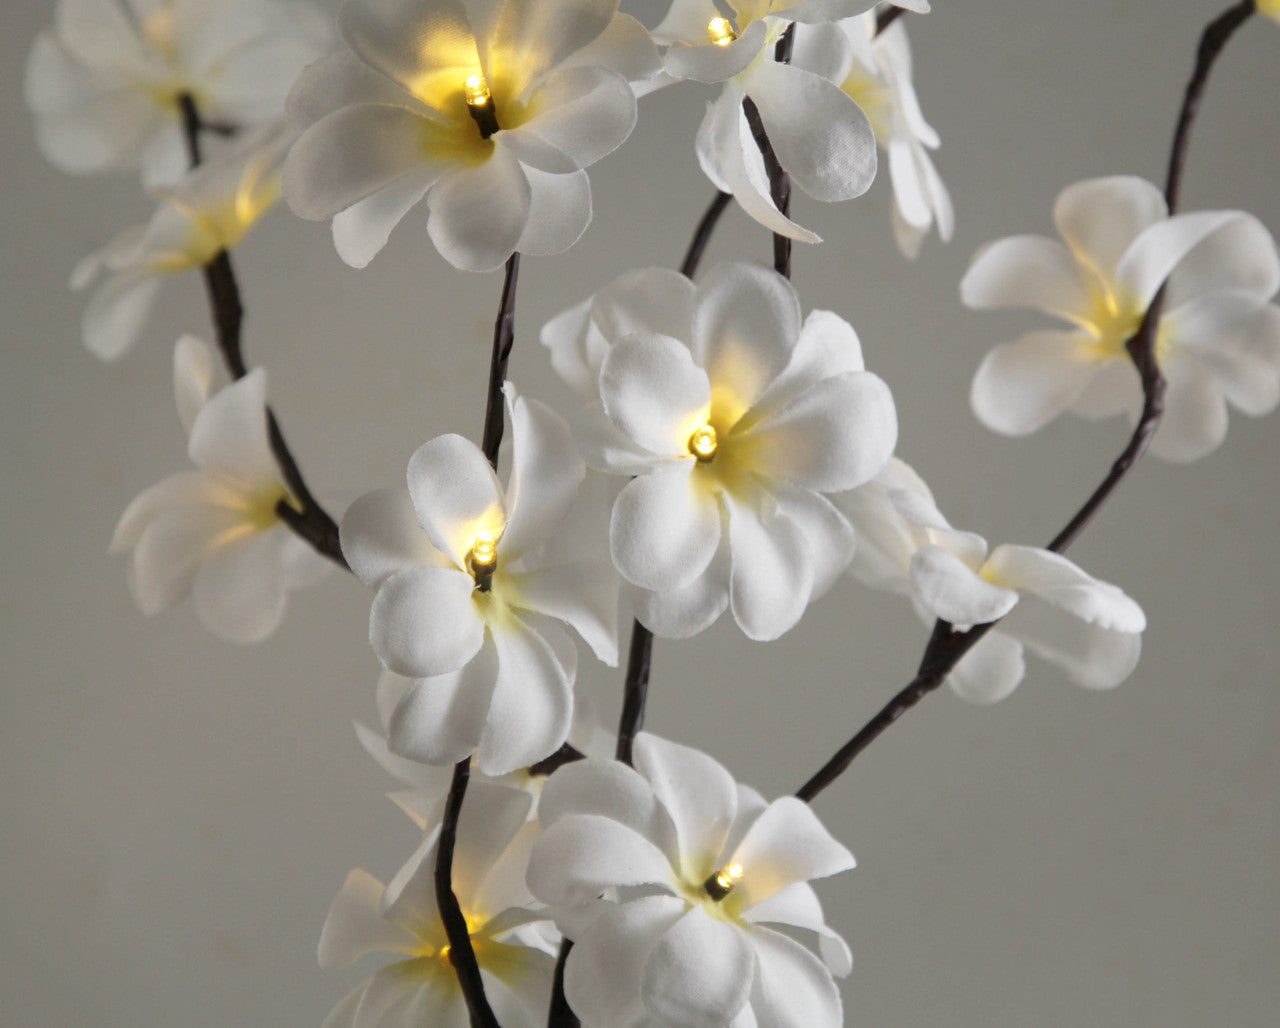 1 Set of 50cm H 20 LED White Frangipani Tree Branch Stem Fairy Light Wedding Event Party Function Table Vase Centrepiece Decoration - SILBERSHELL